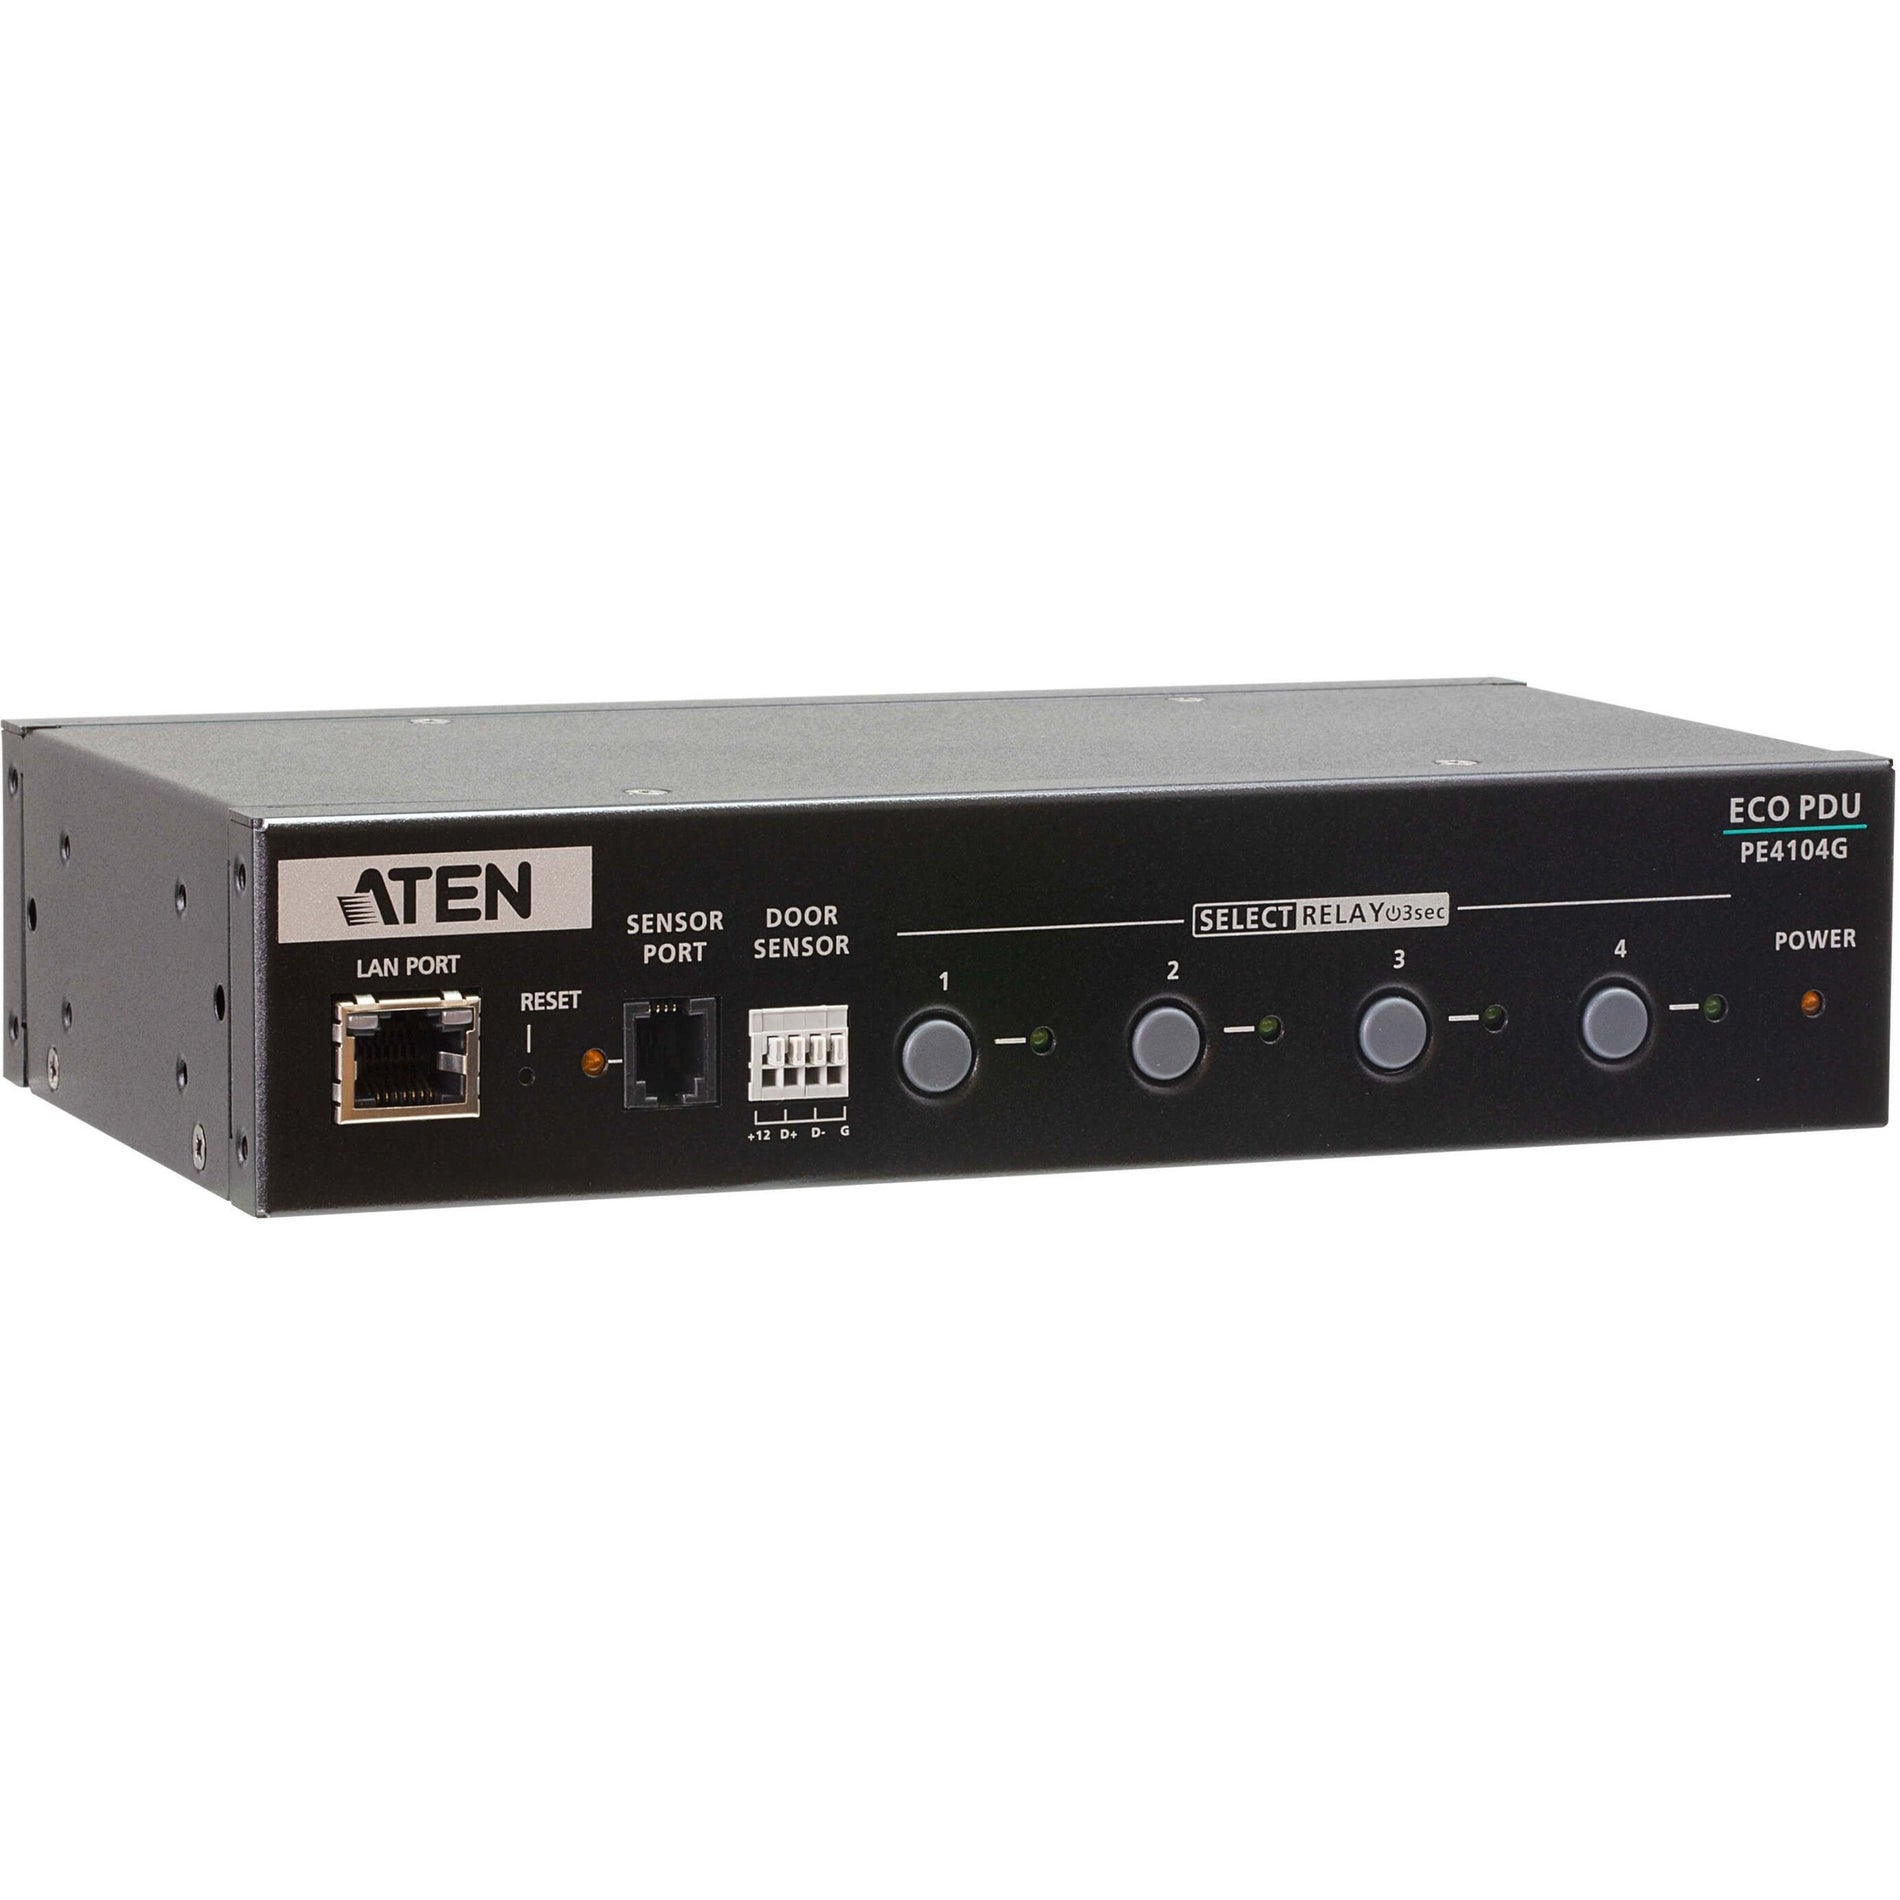 ATEN PE4104G 4-Outlet IPDU Control Box, Remote Outlet Switching, 10A Input Current, 2400VA Power Rating